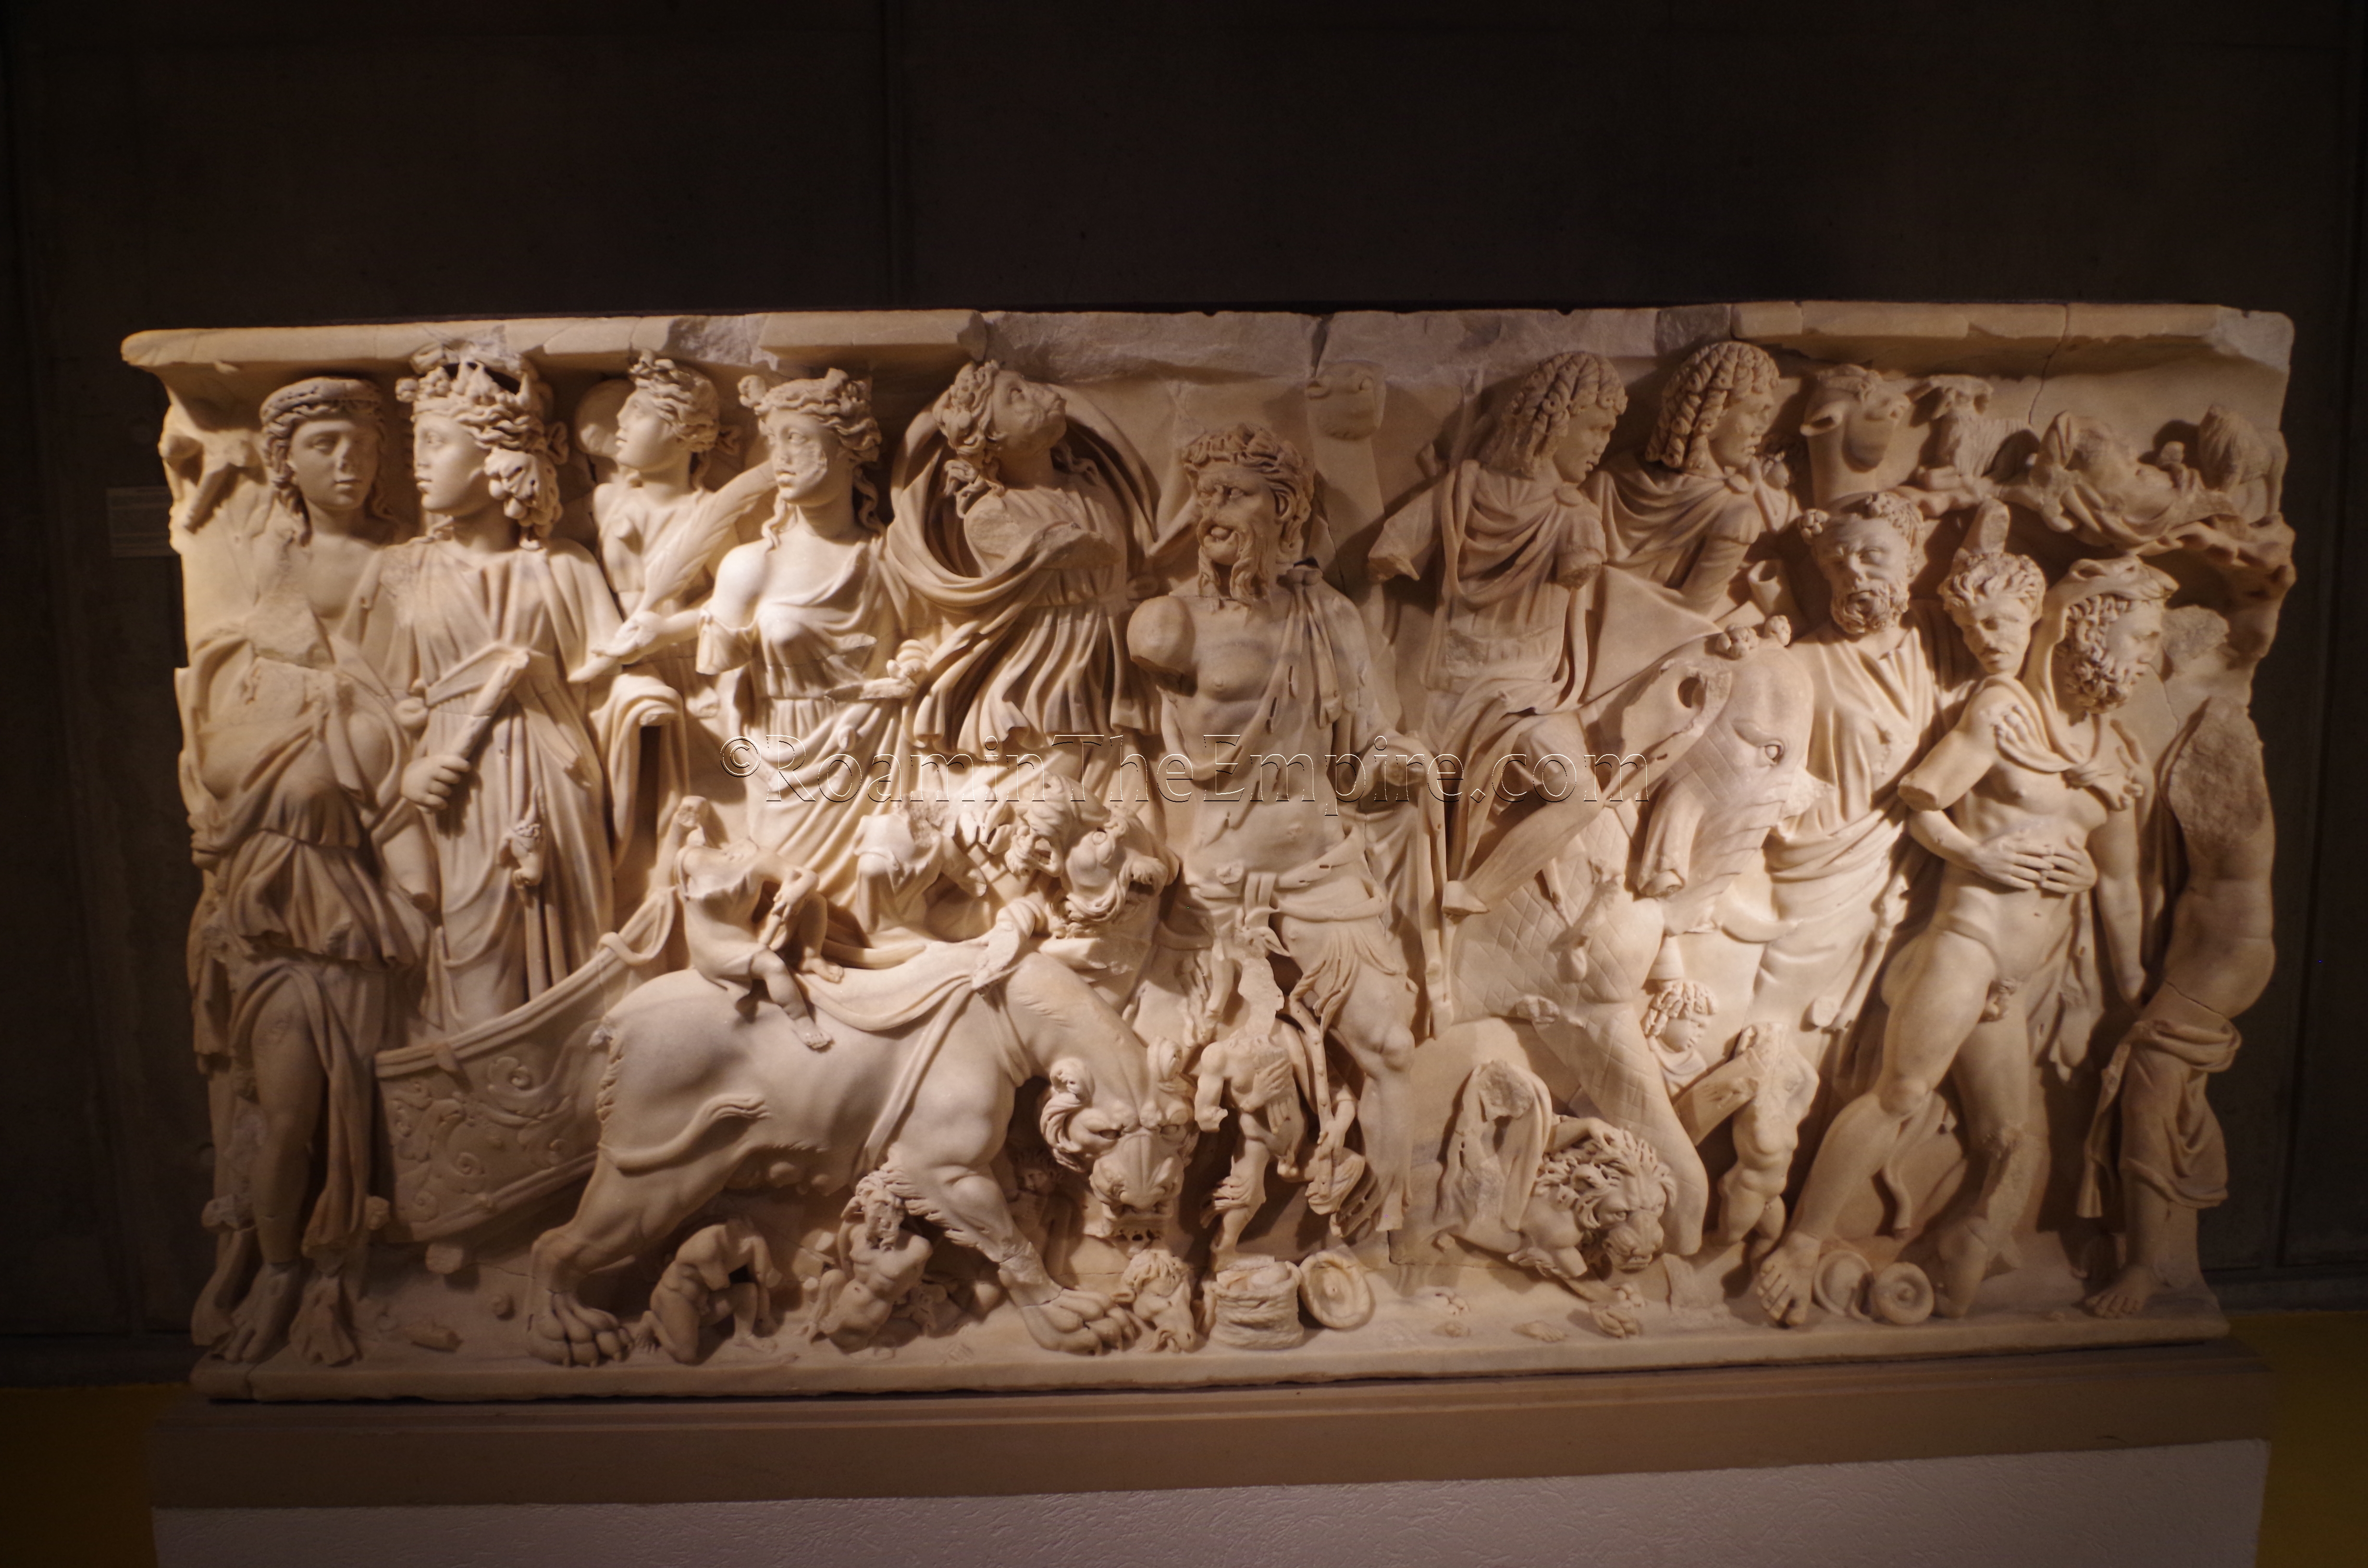 Sarcophagus depicting the triumph of Dionysus in India. Probably produced in Rome in the 3rd century CE and found in the Saint-Irénée area of Lyon. Lugdunum.